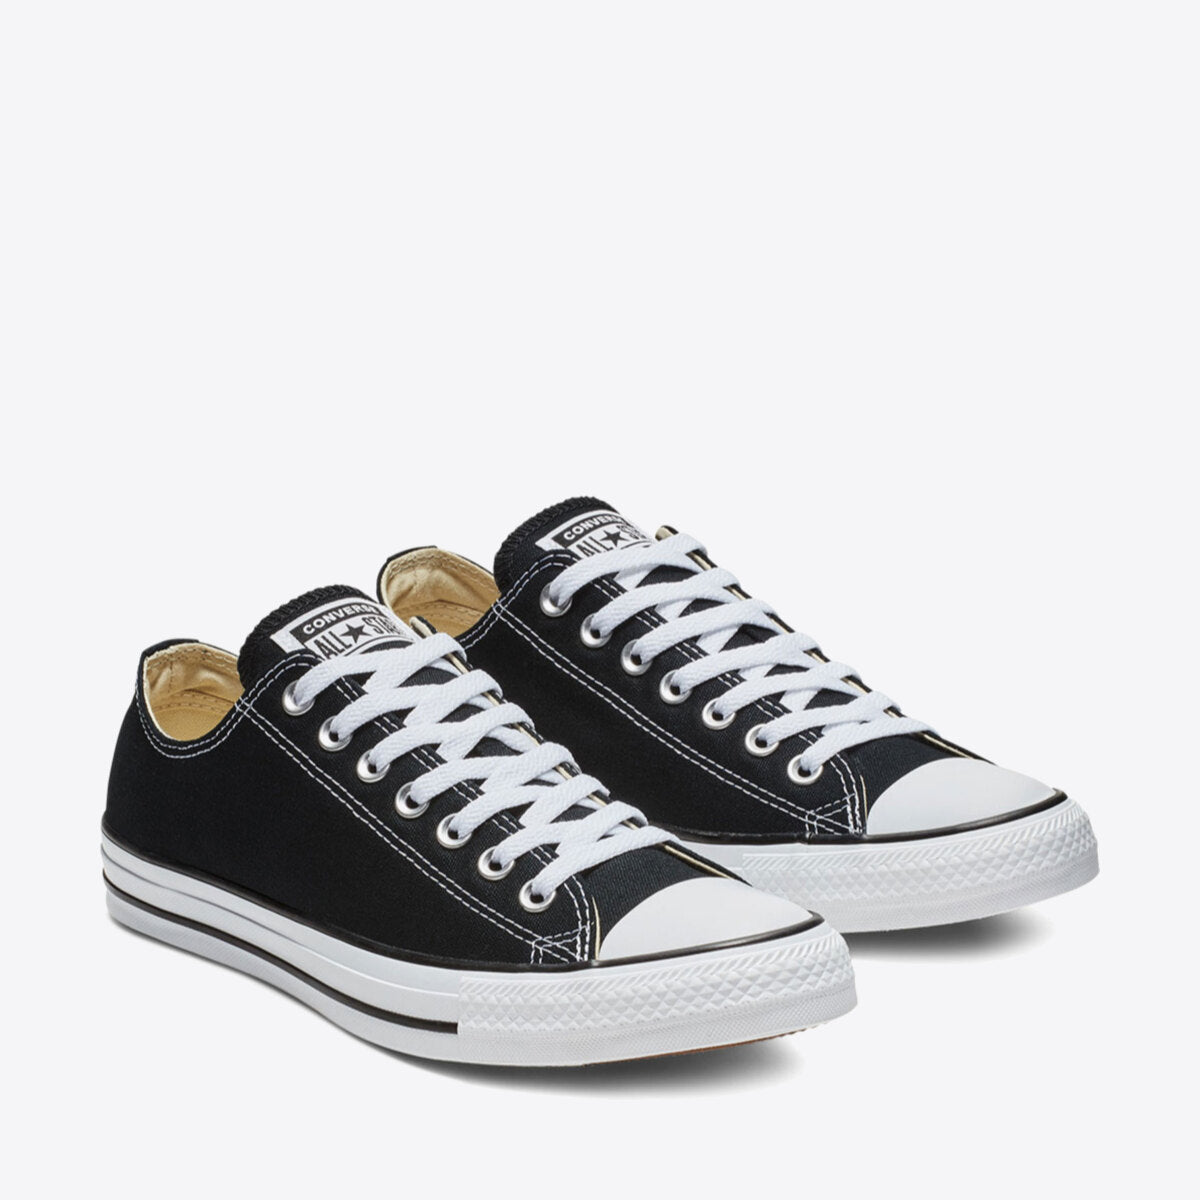 CONVERSE Chuck Taylor All Star Canvas Low Black - Image 0